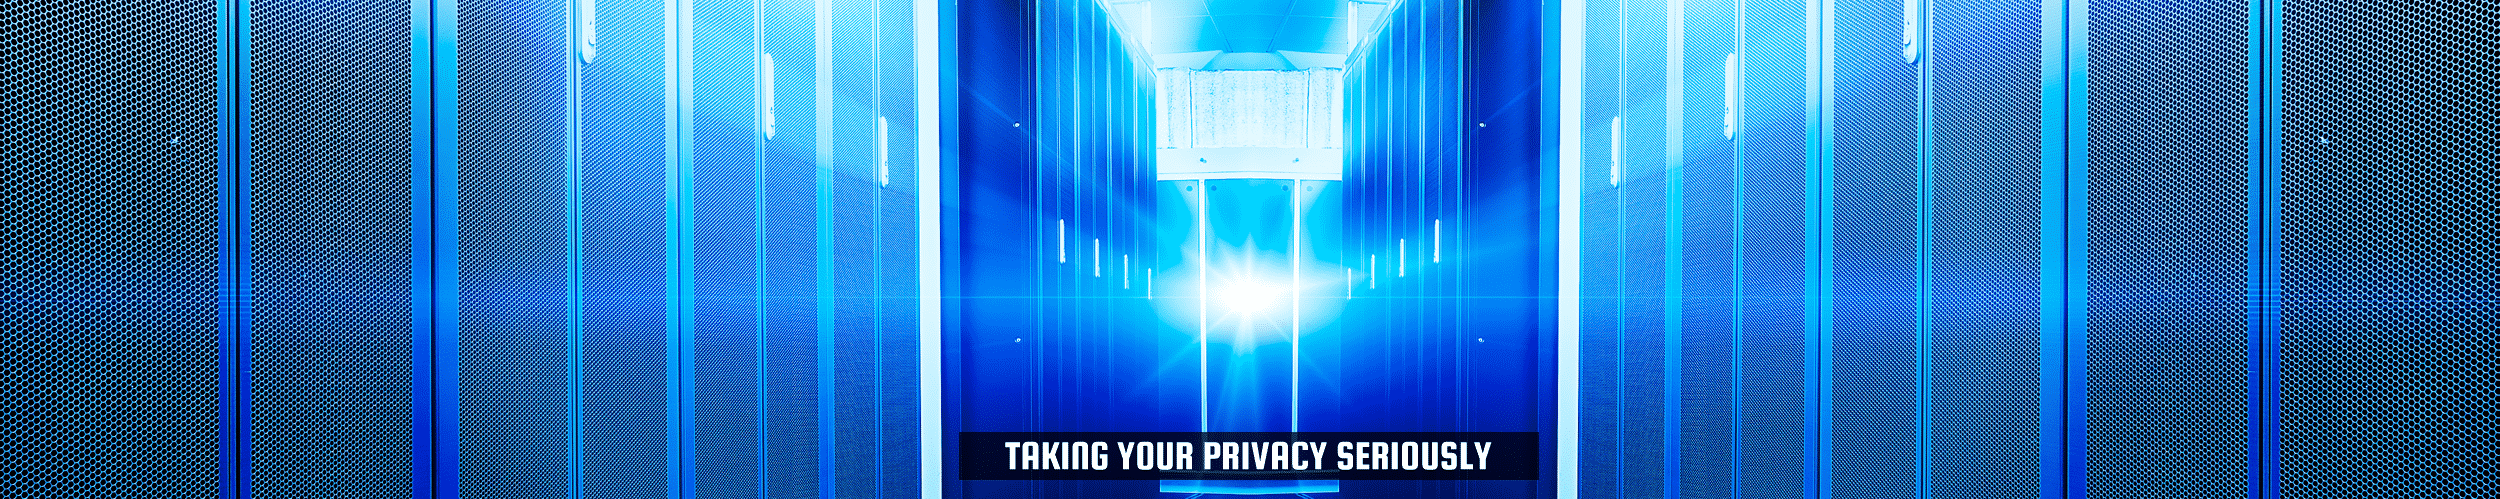 52Degrees acceptable usage privacy policy - feature image | "taking your privacy seriously" | a row of servers illuminated by a blue light | Telecoms Solutions, Norwich